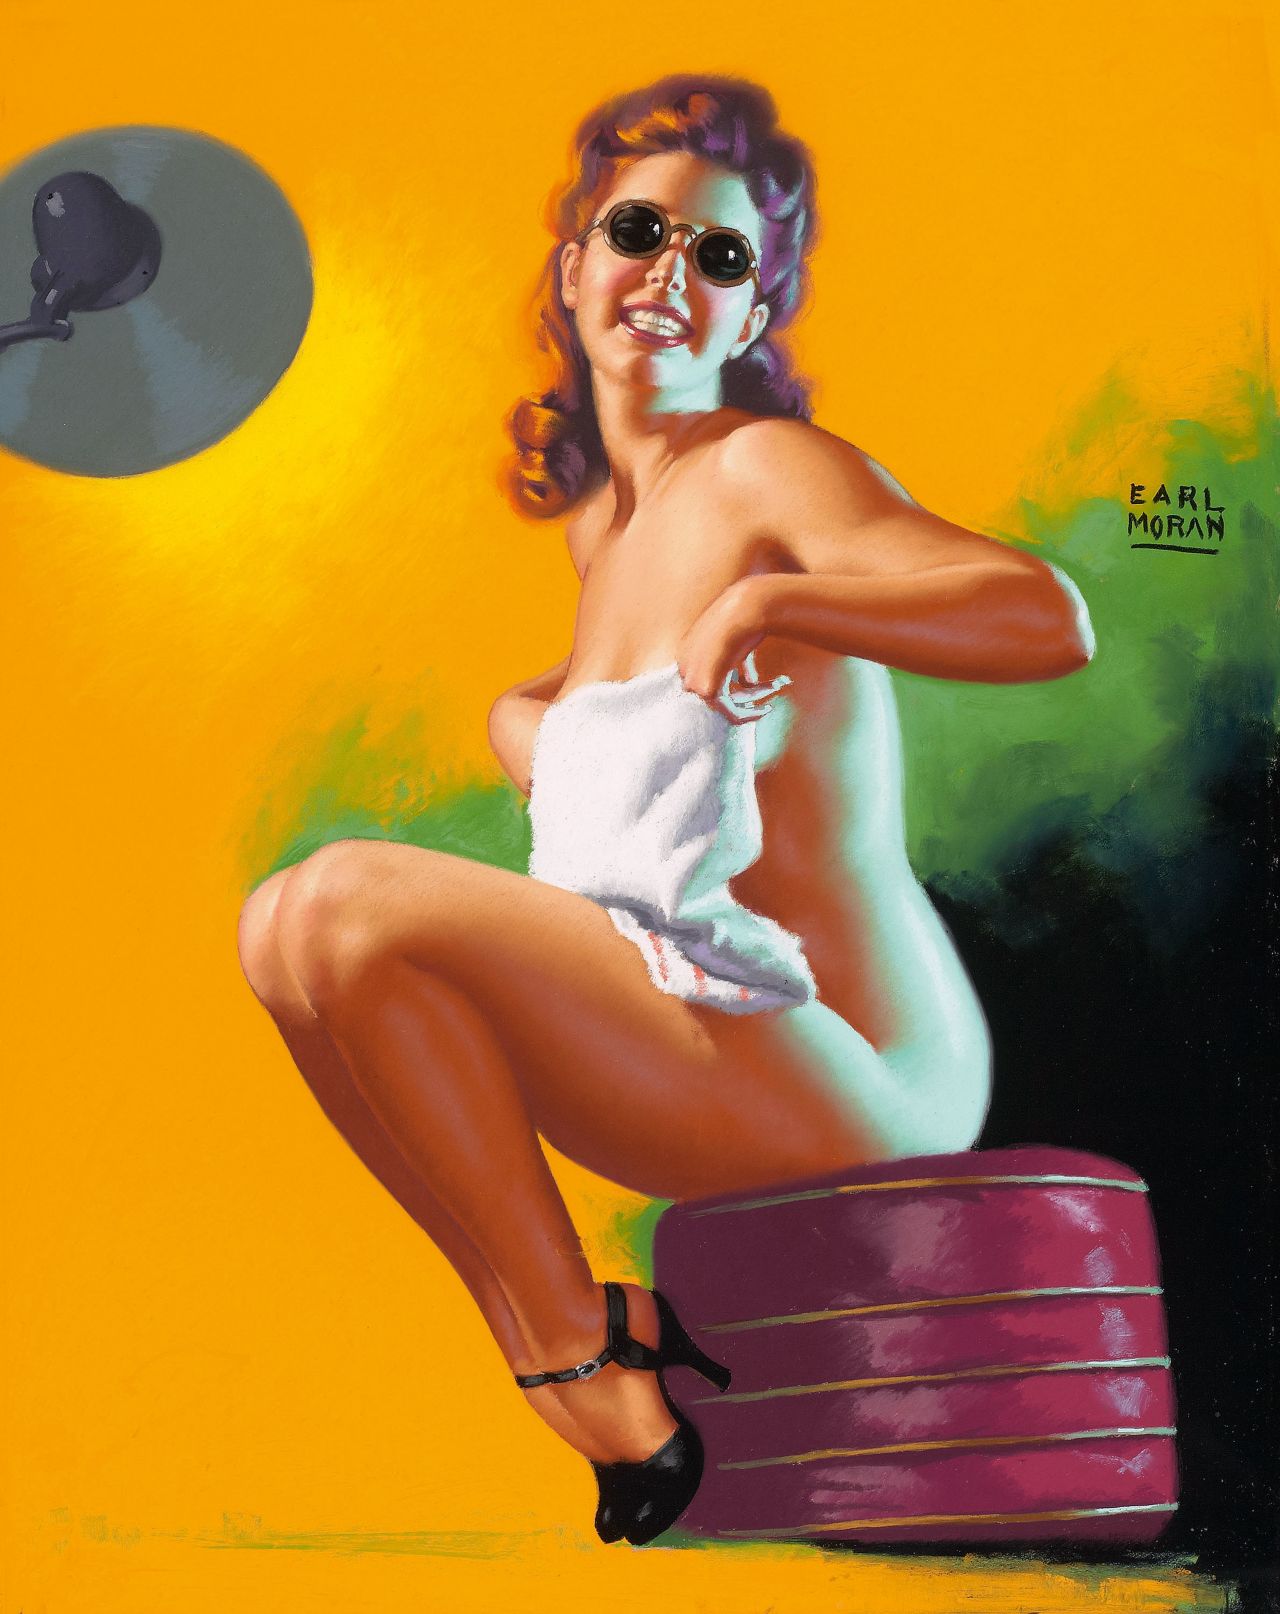 Fantasy Pin Up Girls Nude - The lost art of the American pin-up | CNN